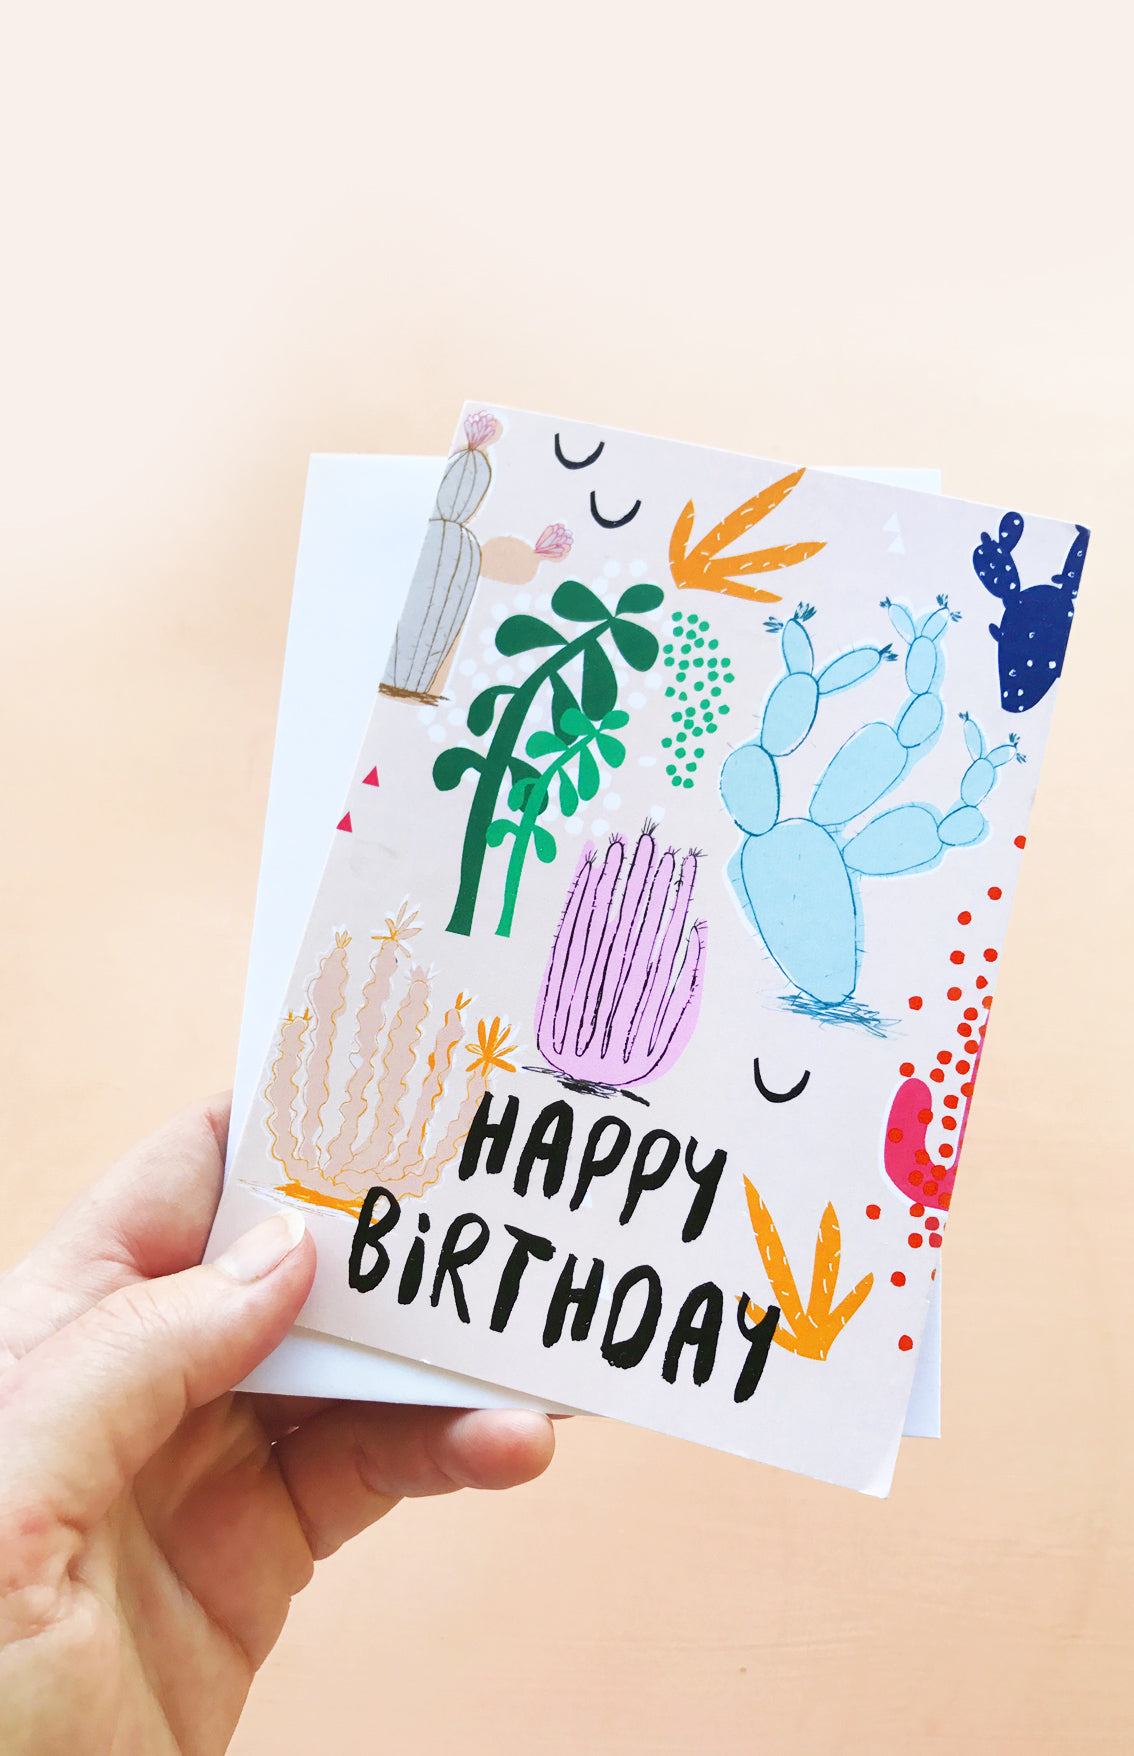 SET OF 3 Greeting folded cards (5" X 7") (10486665288)